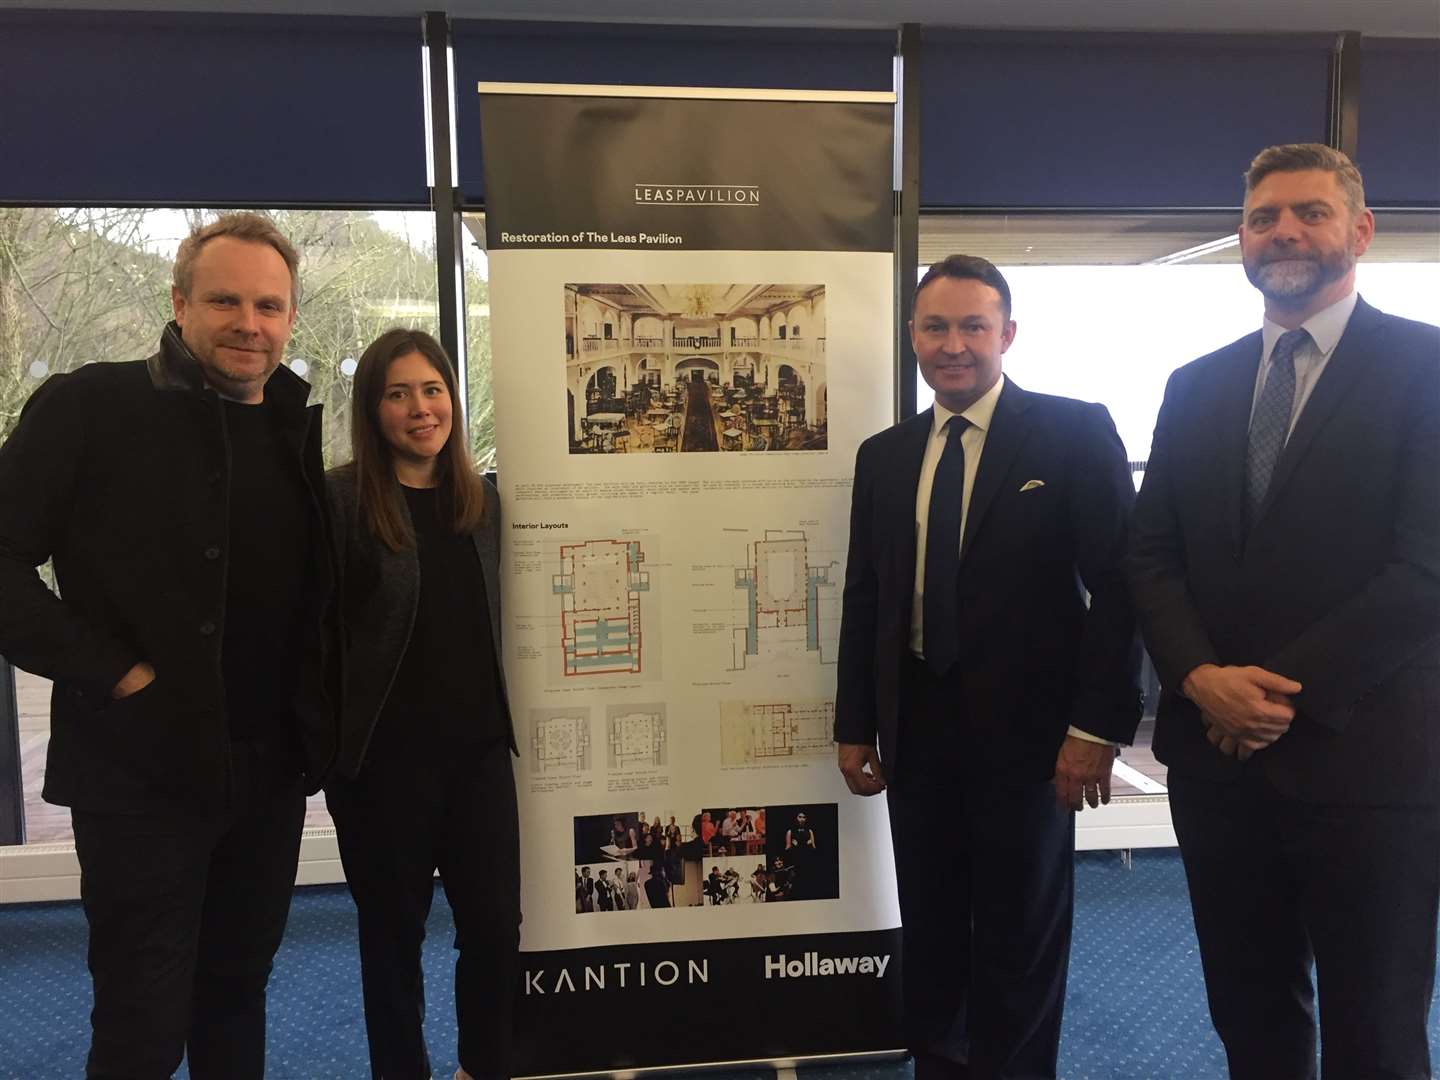 L-R Architect Guy Hollaway, architect Michelle Earnshaw, Miles MacKinnon from Kantion and Paul Landsberg, planning consultant at the public consultation for the Leas Pavilion development earlier this year